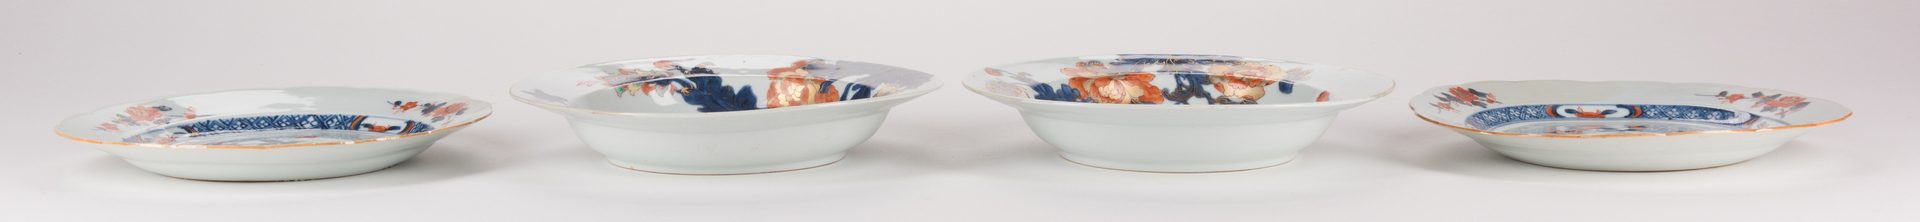 Lot 315: 4 Chinese Imari 18th cent. Porcelain items